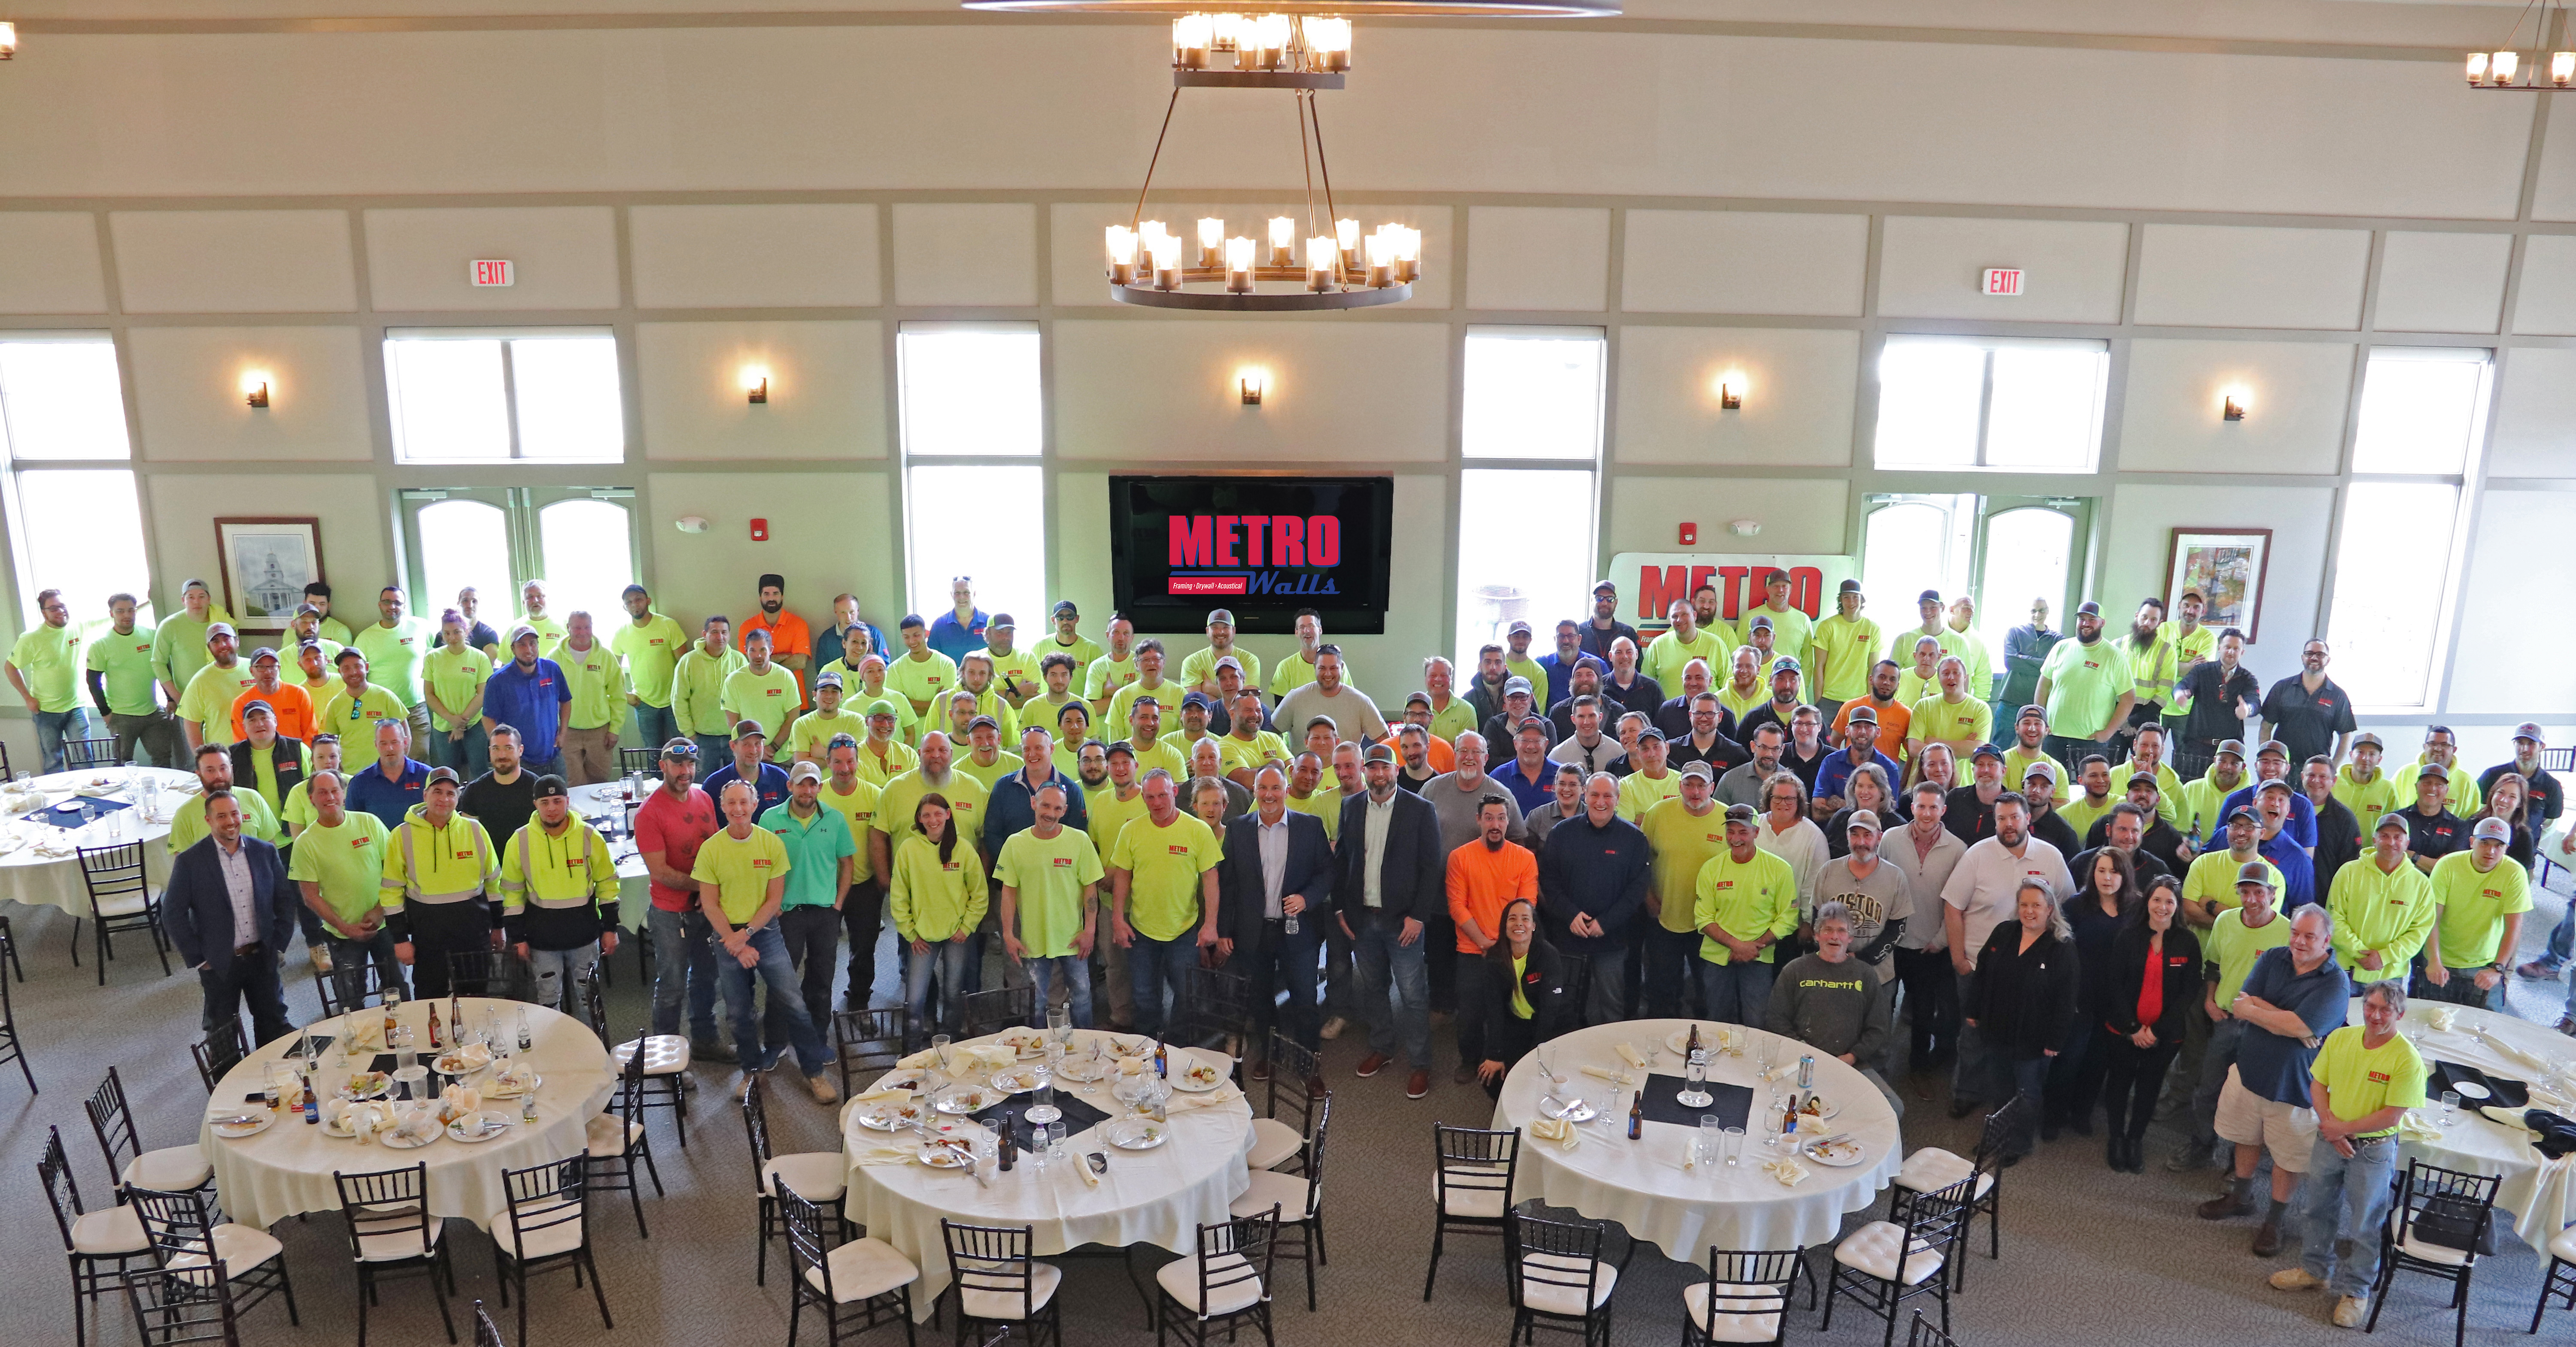 Metro Walls Becomes 100% Employee-Owned